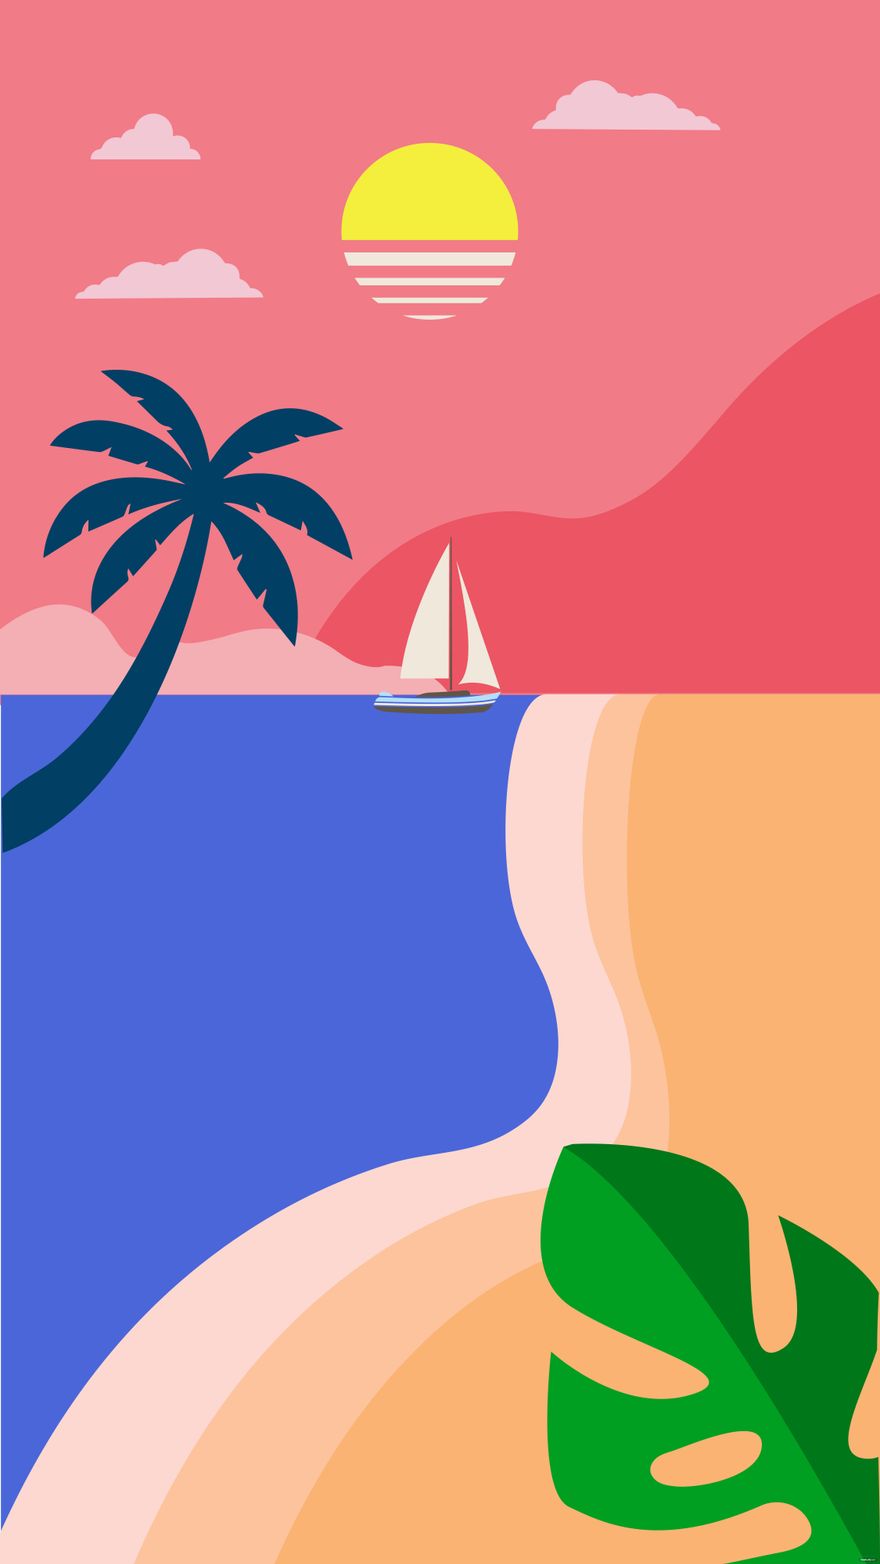 Free Iphone Beach Background in Illustrator, EPS, SVG, JPG, PNG